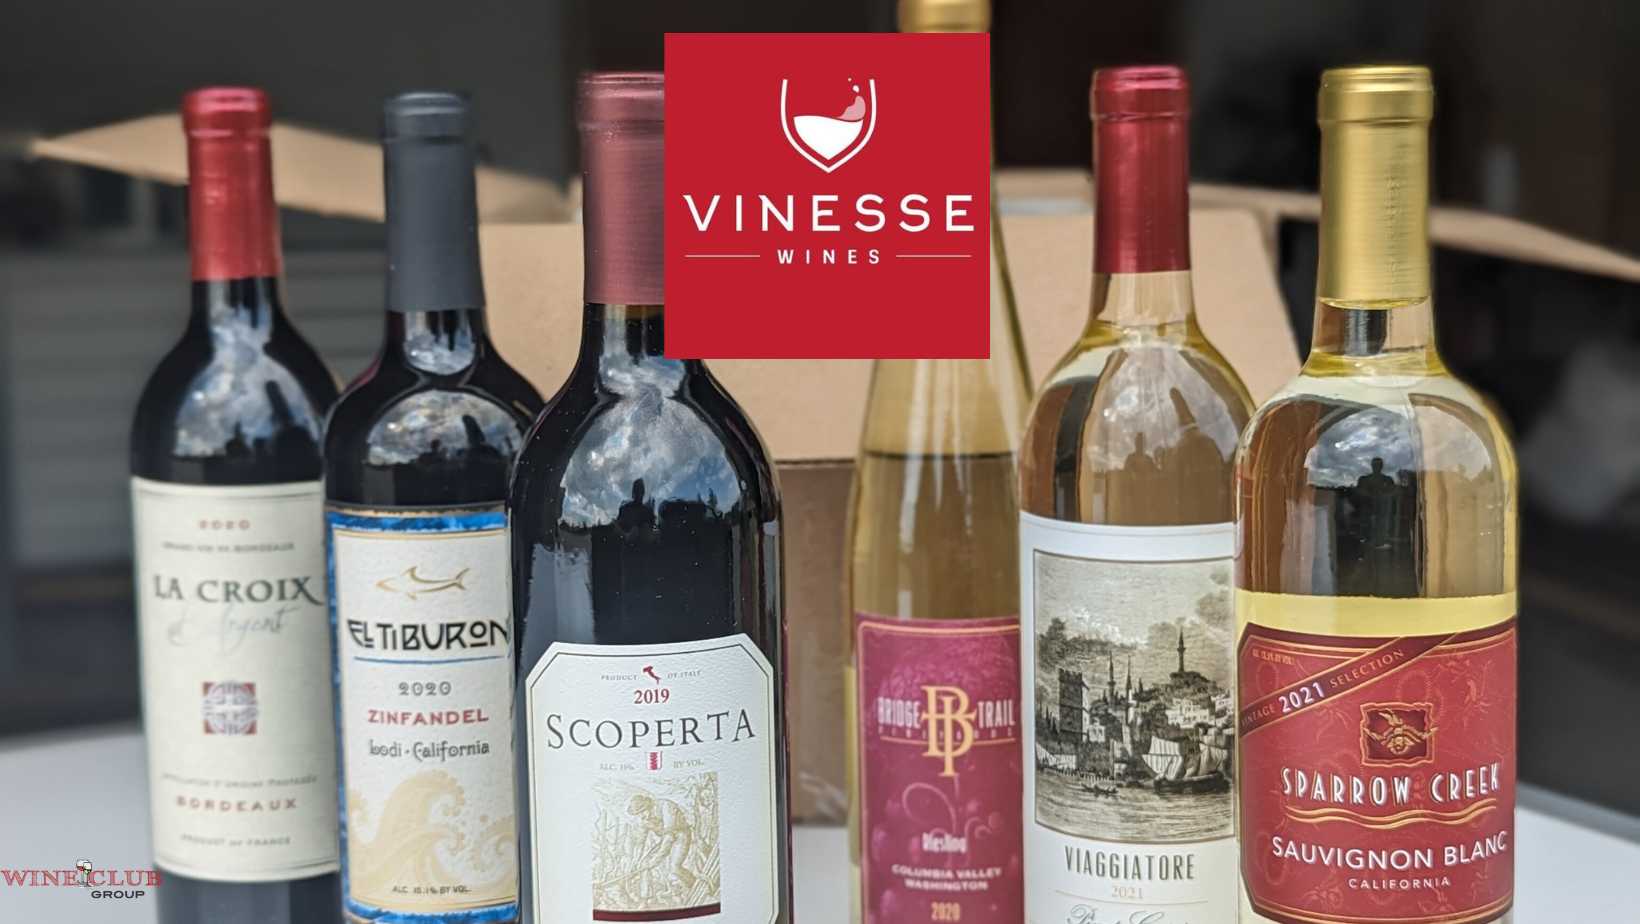 Vinesse Wine of the Month Club — We Reviewed All